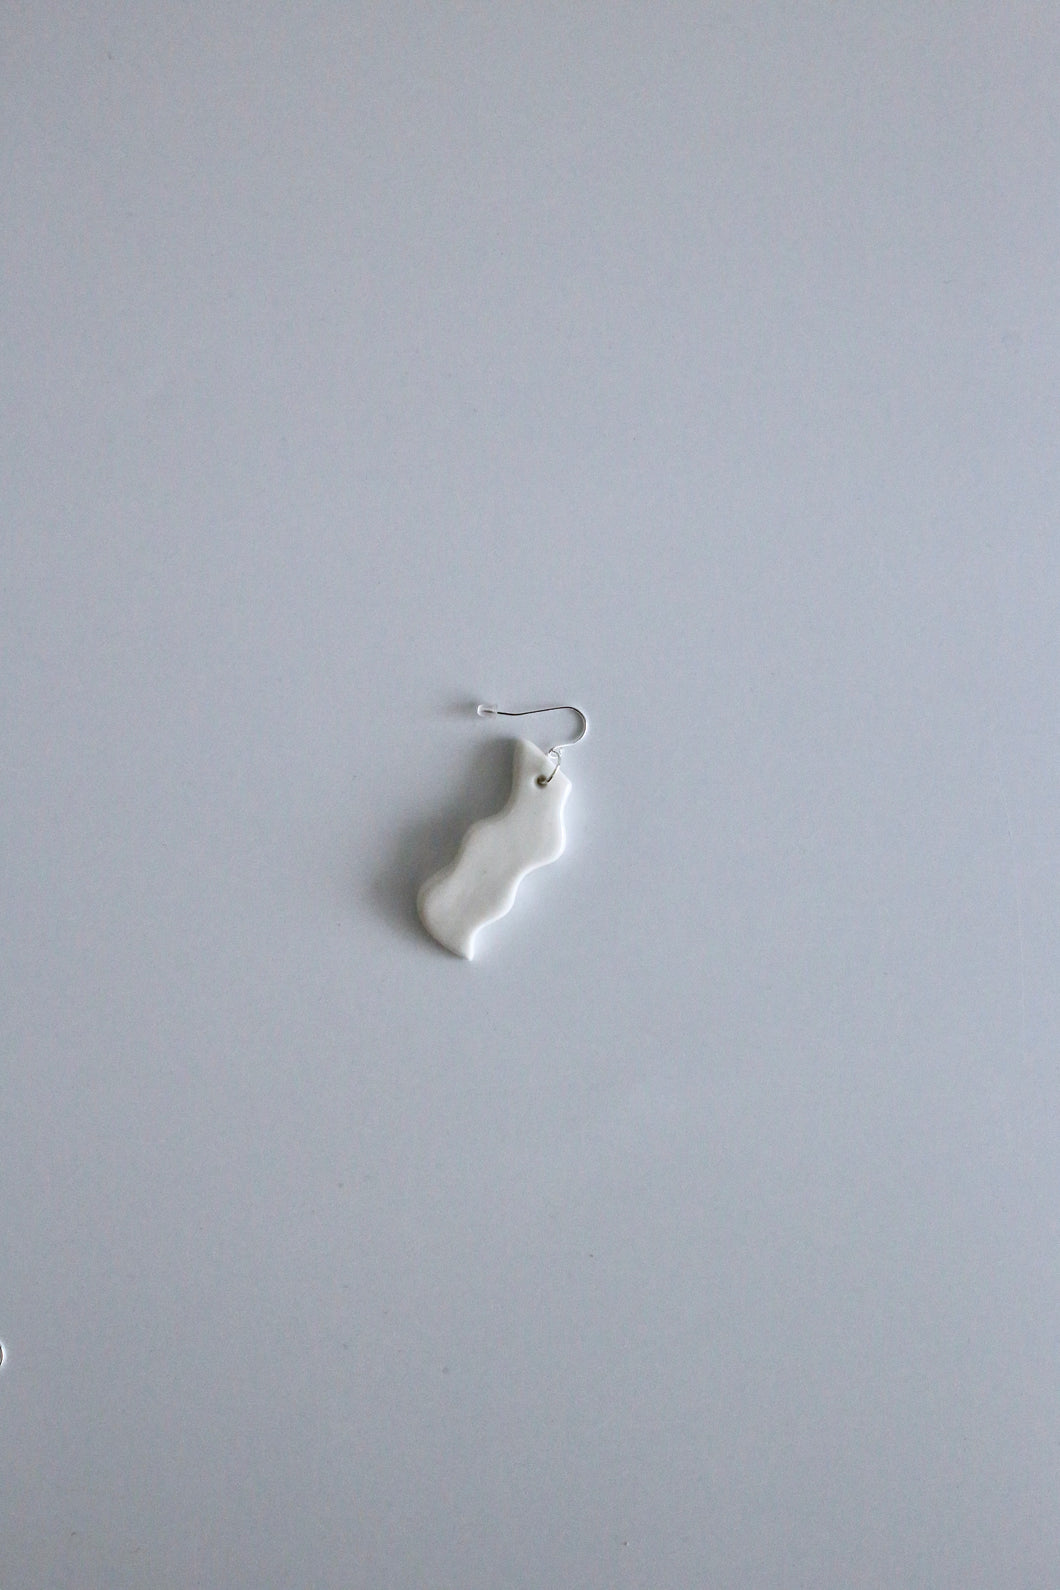 【ARC objects】porcelain Squiggke Earring 片耳ピアス